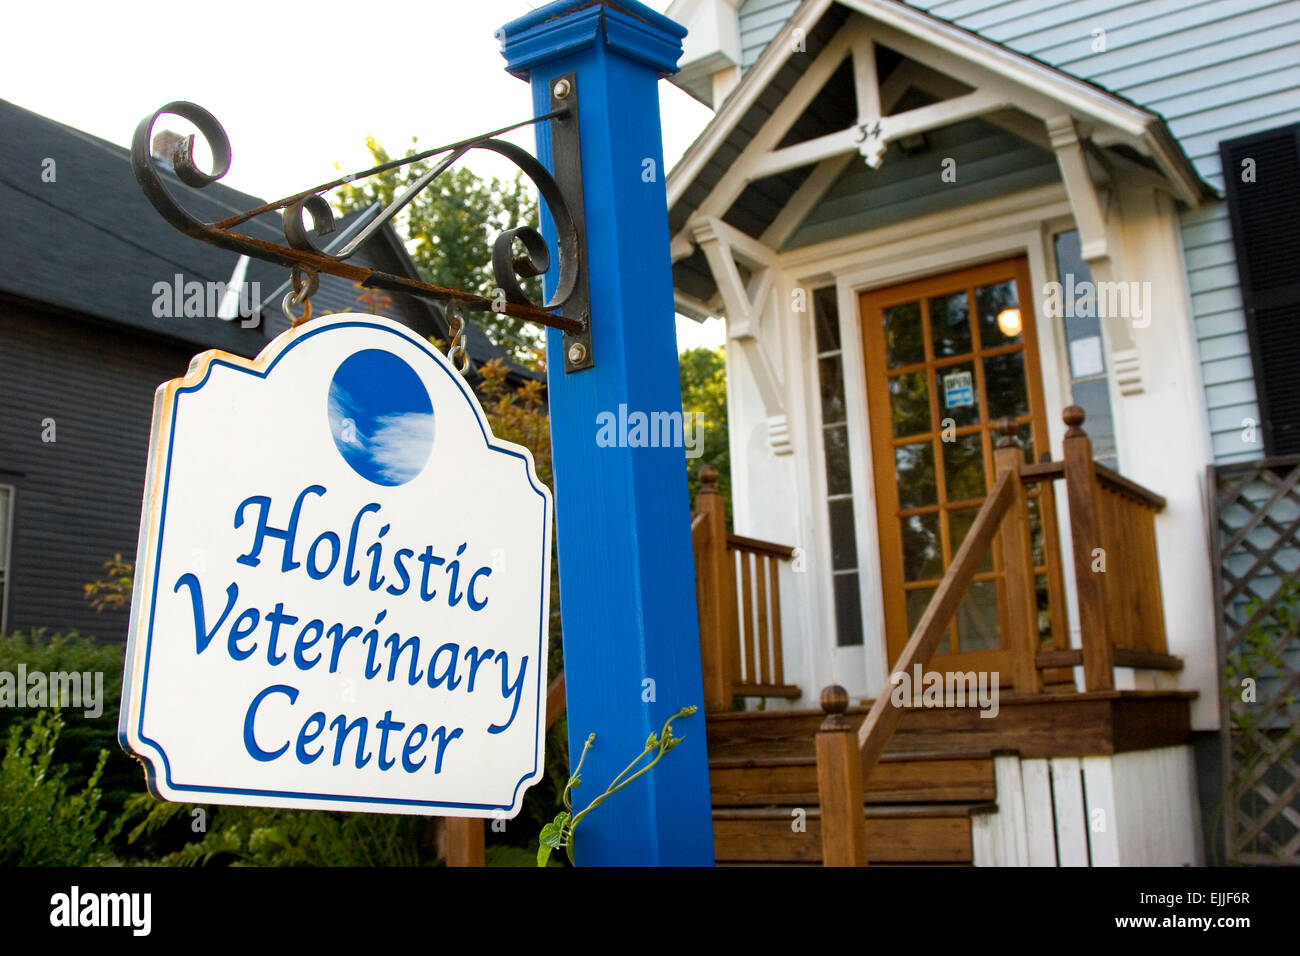 Holistic veterinary center sign in front of veterinary clinic Stock Photo